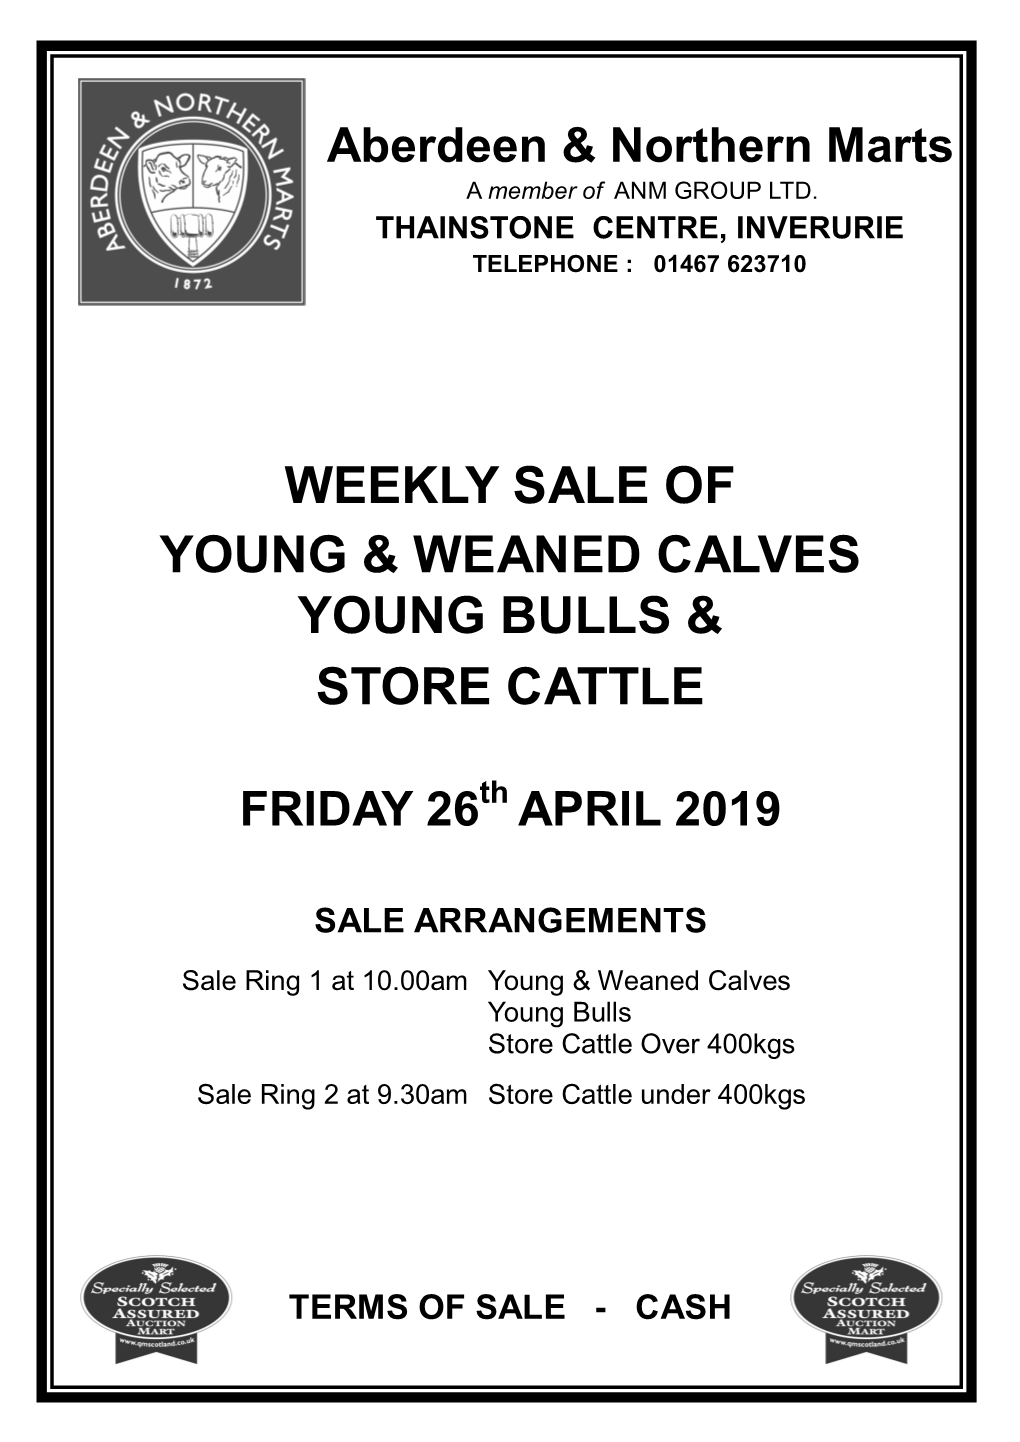 Weekly Sale of Young & Weaned Calves Young Bulls